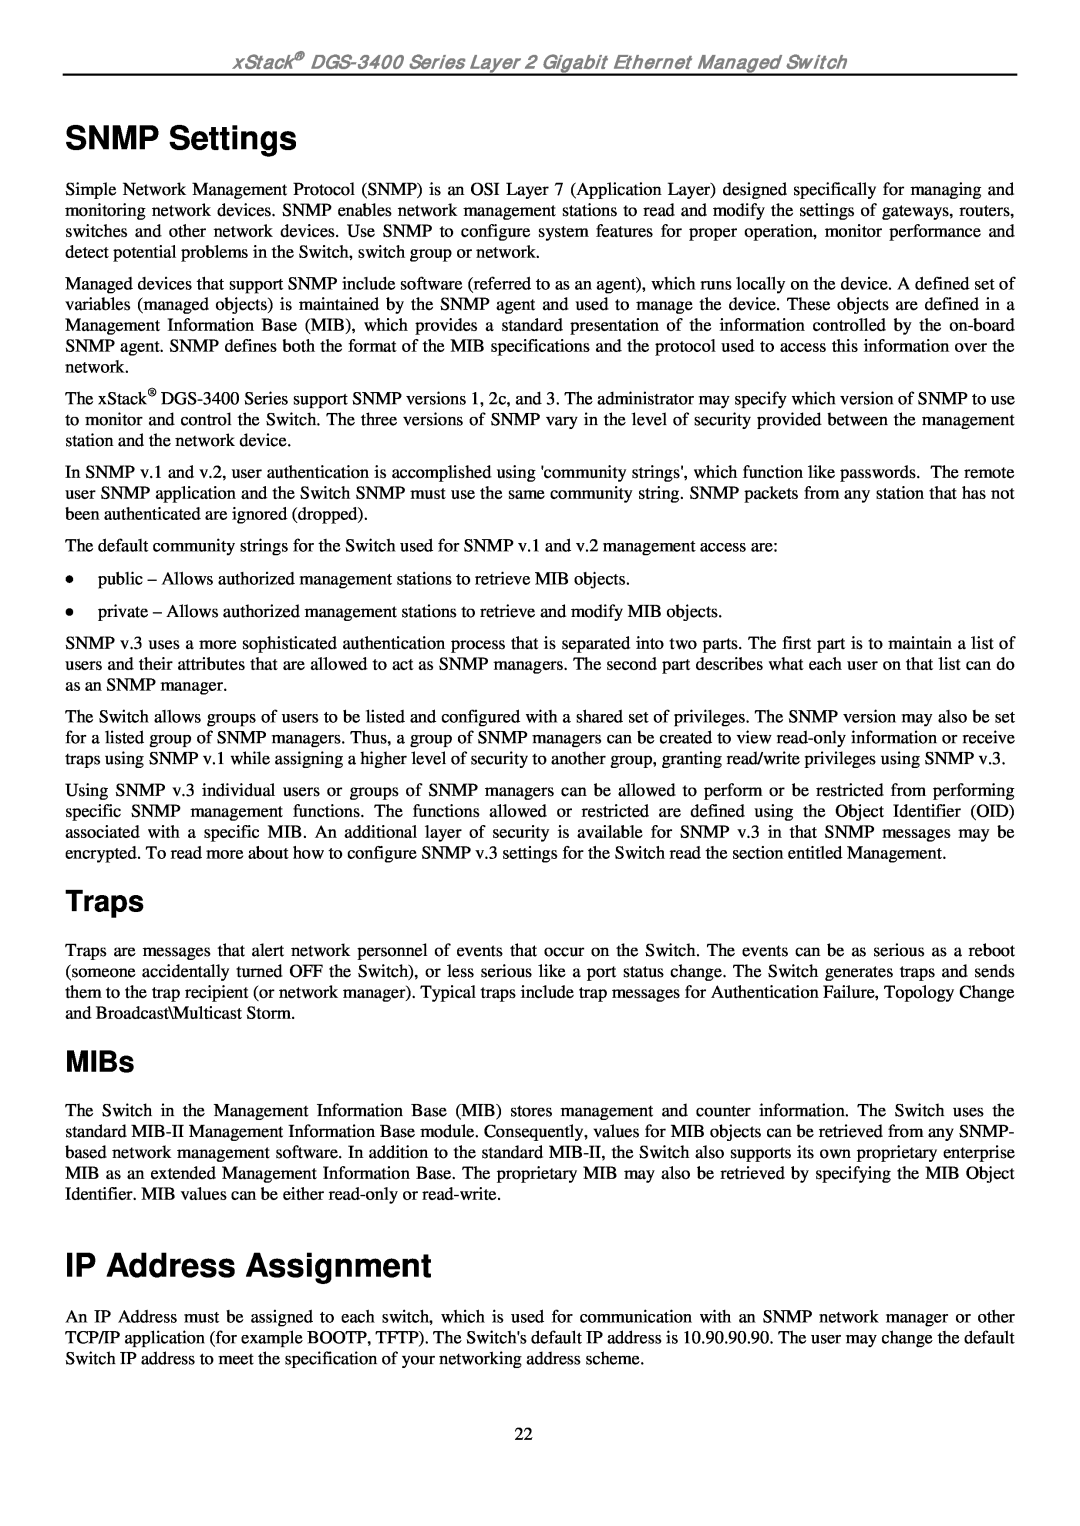 D-Link ethernet managed switch manual SNMP Settings, IP Address Assignment, Traps, MIBs 